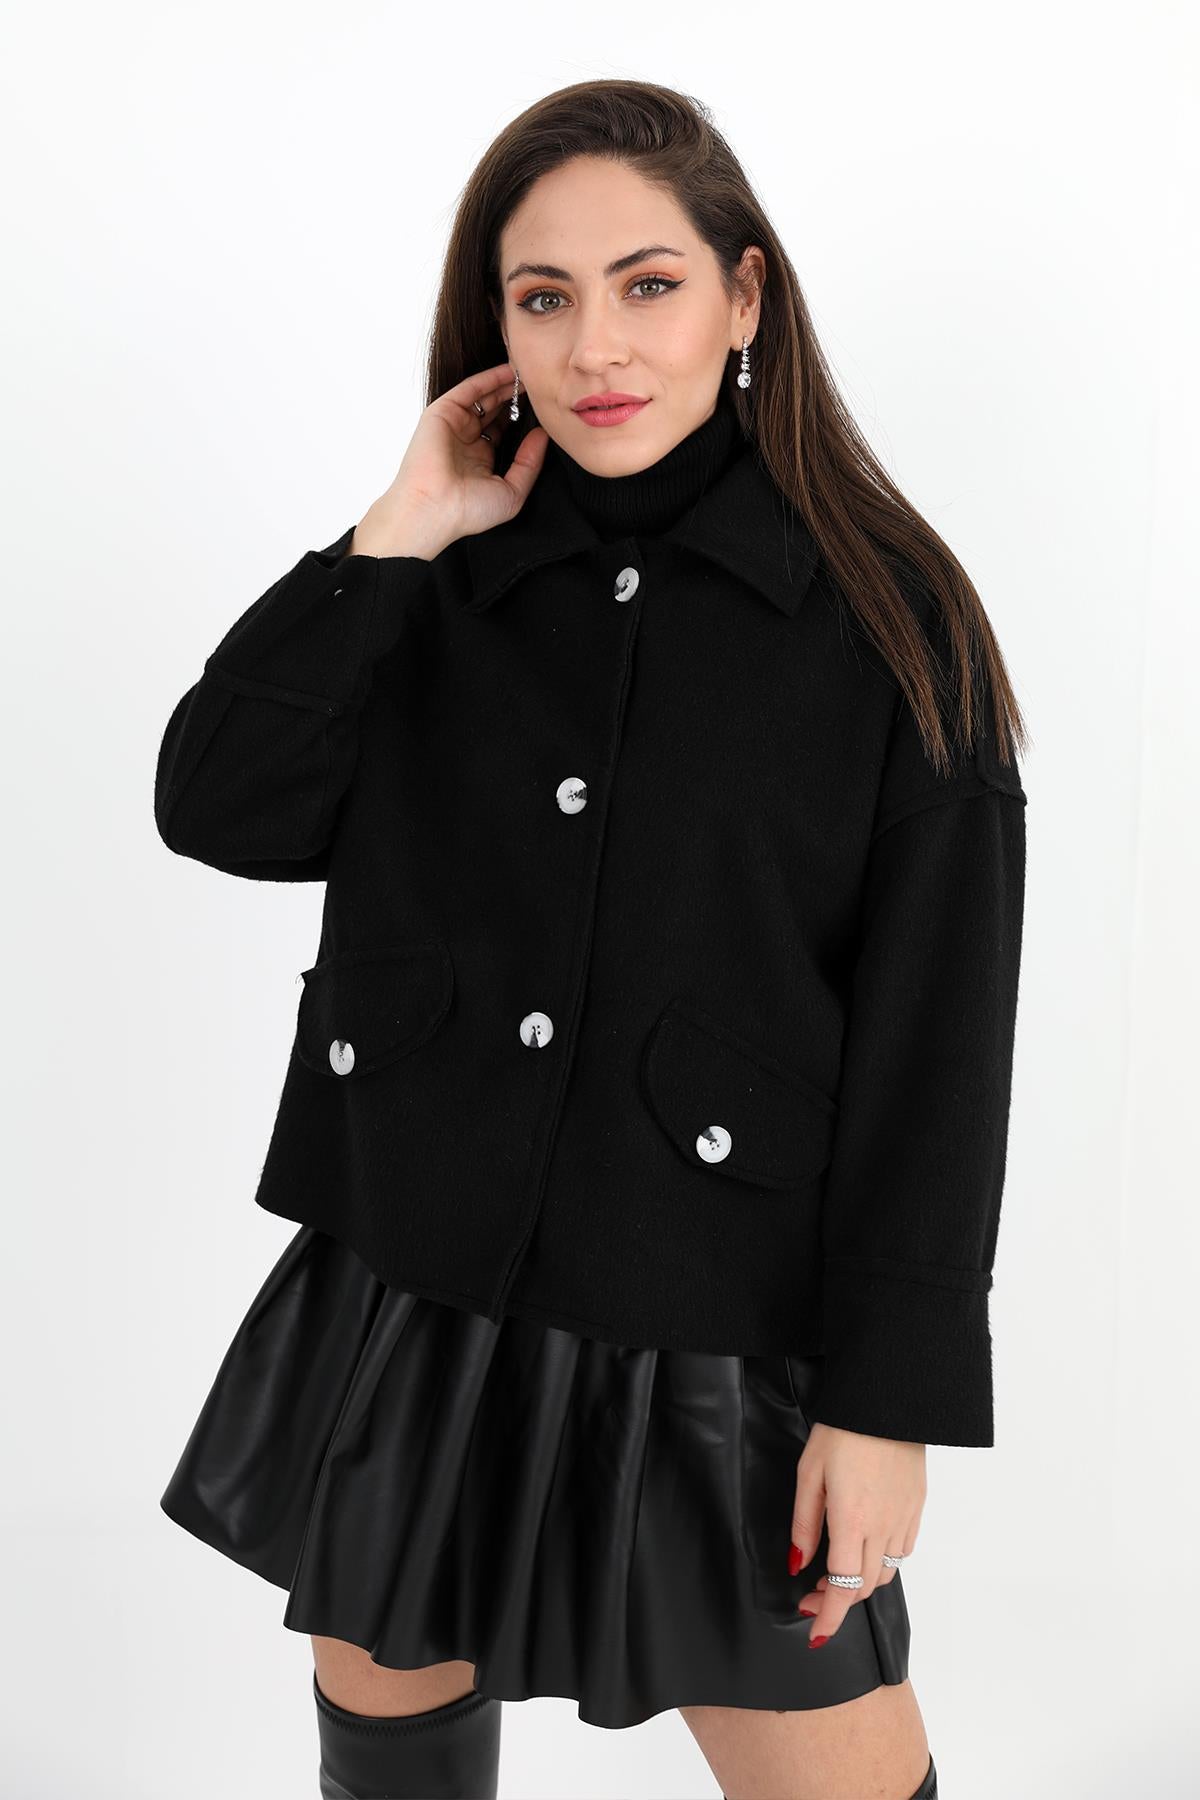 Women's Coat with Pocket Cover Buttons Short Stash - Black - STREETMODE™